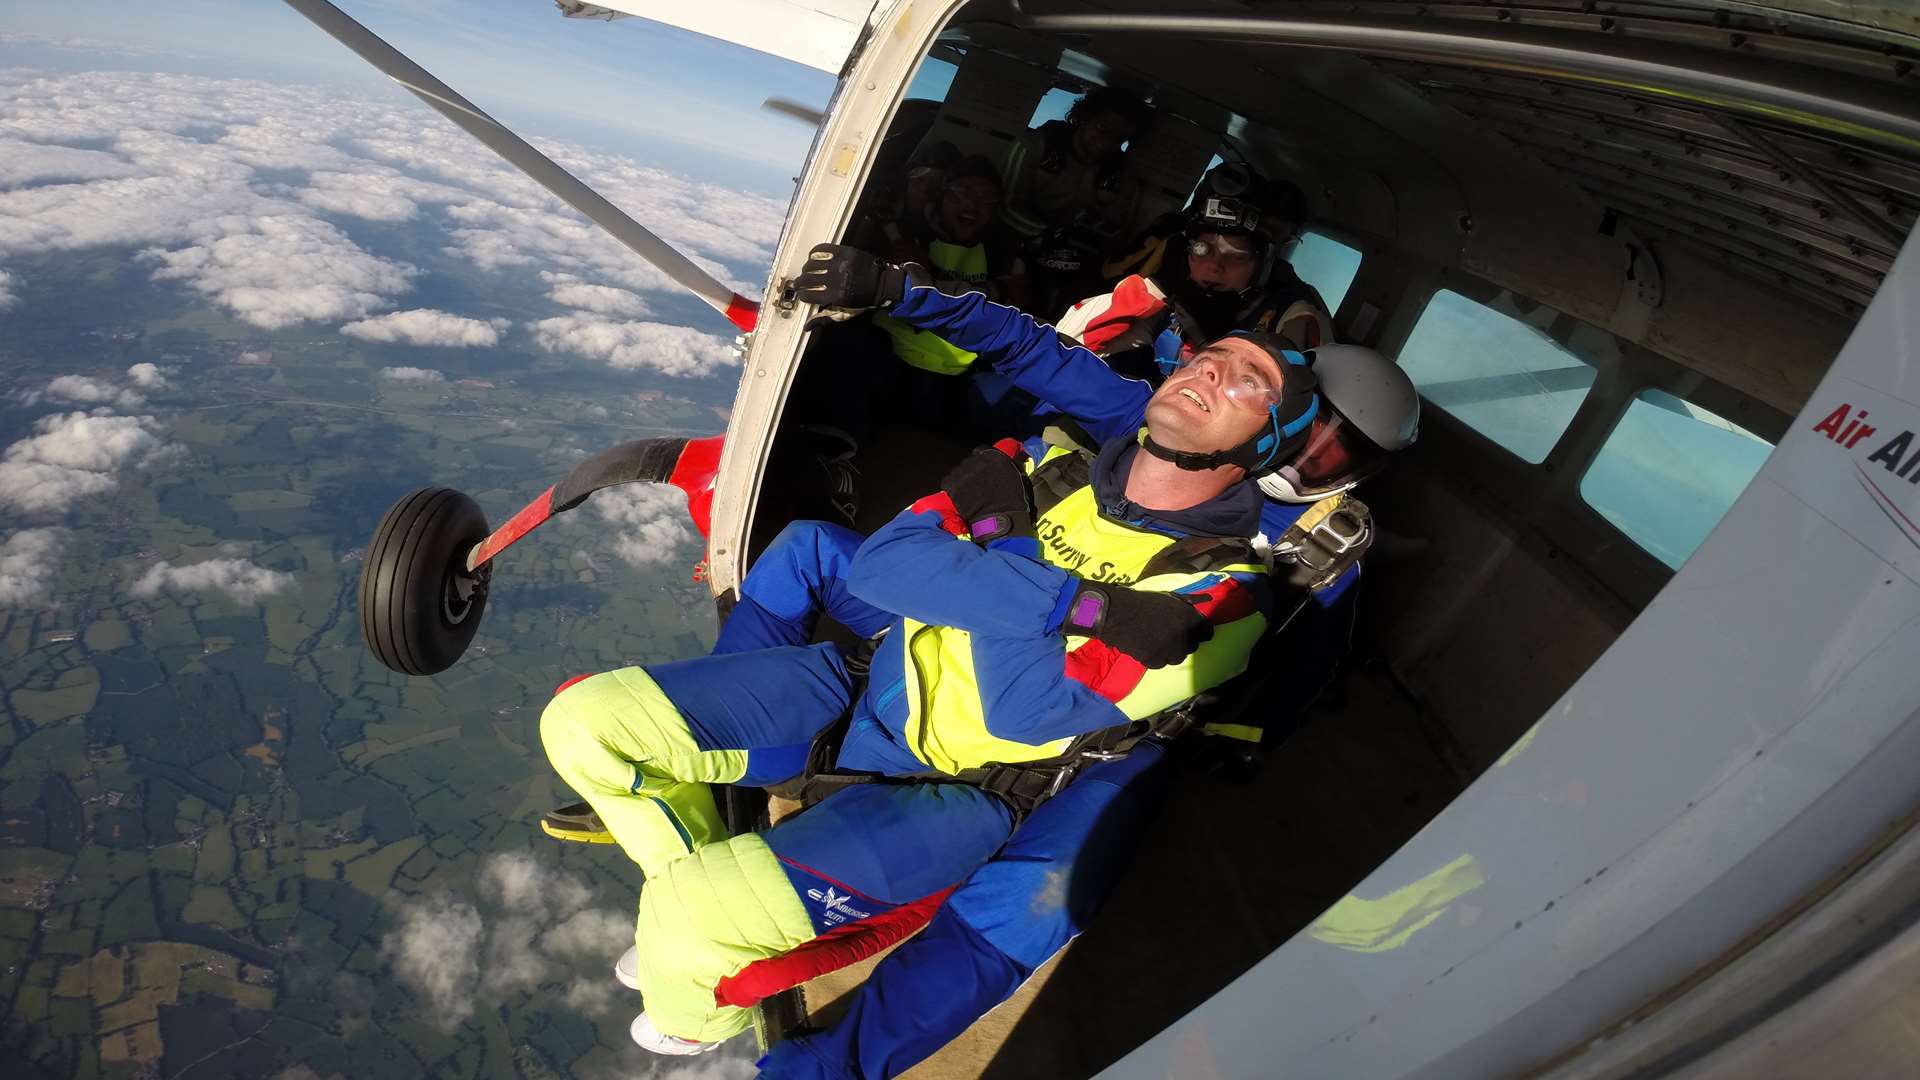 Trevor McBean about to make the jump from 12,000 feet